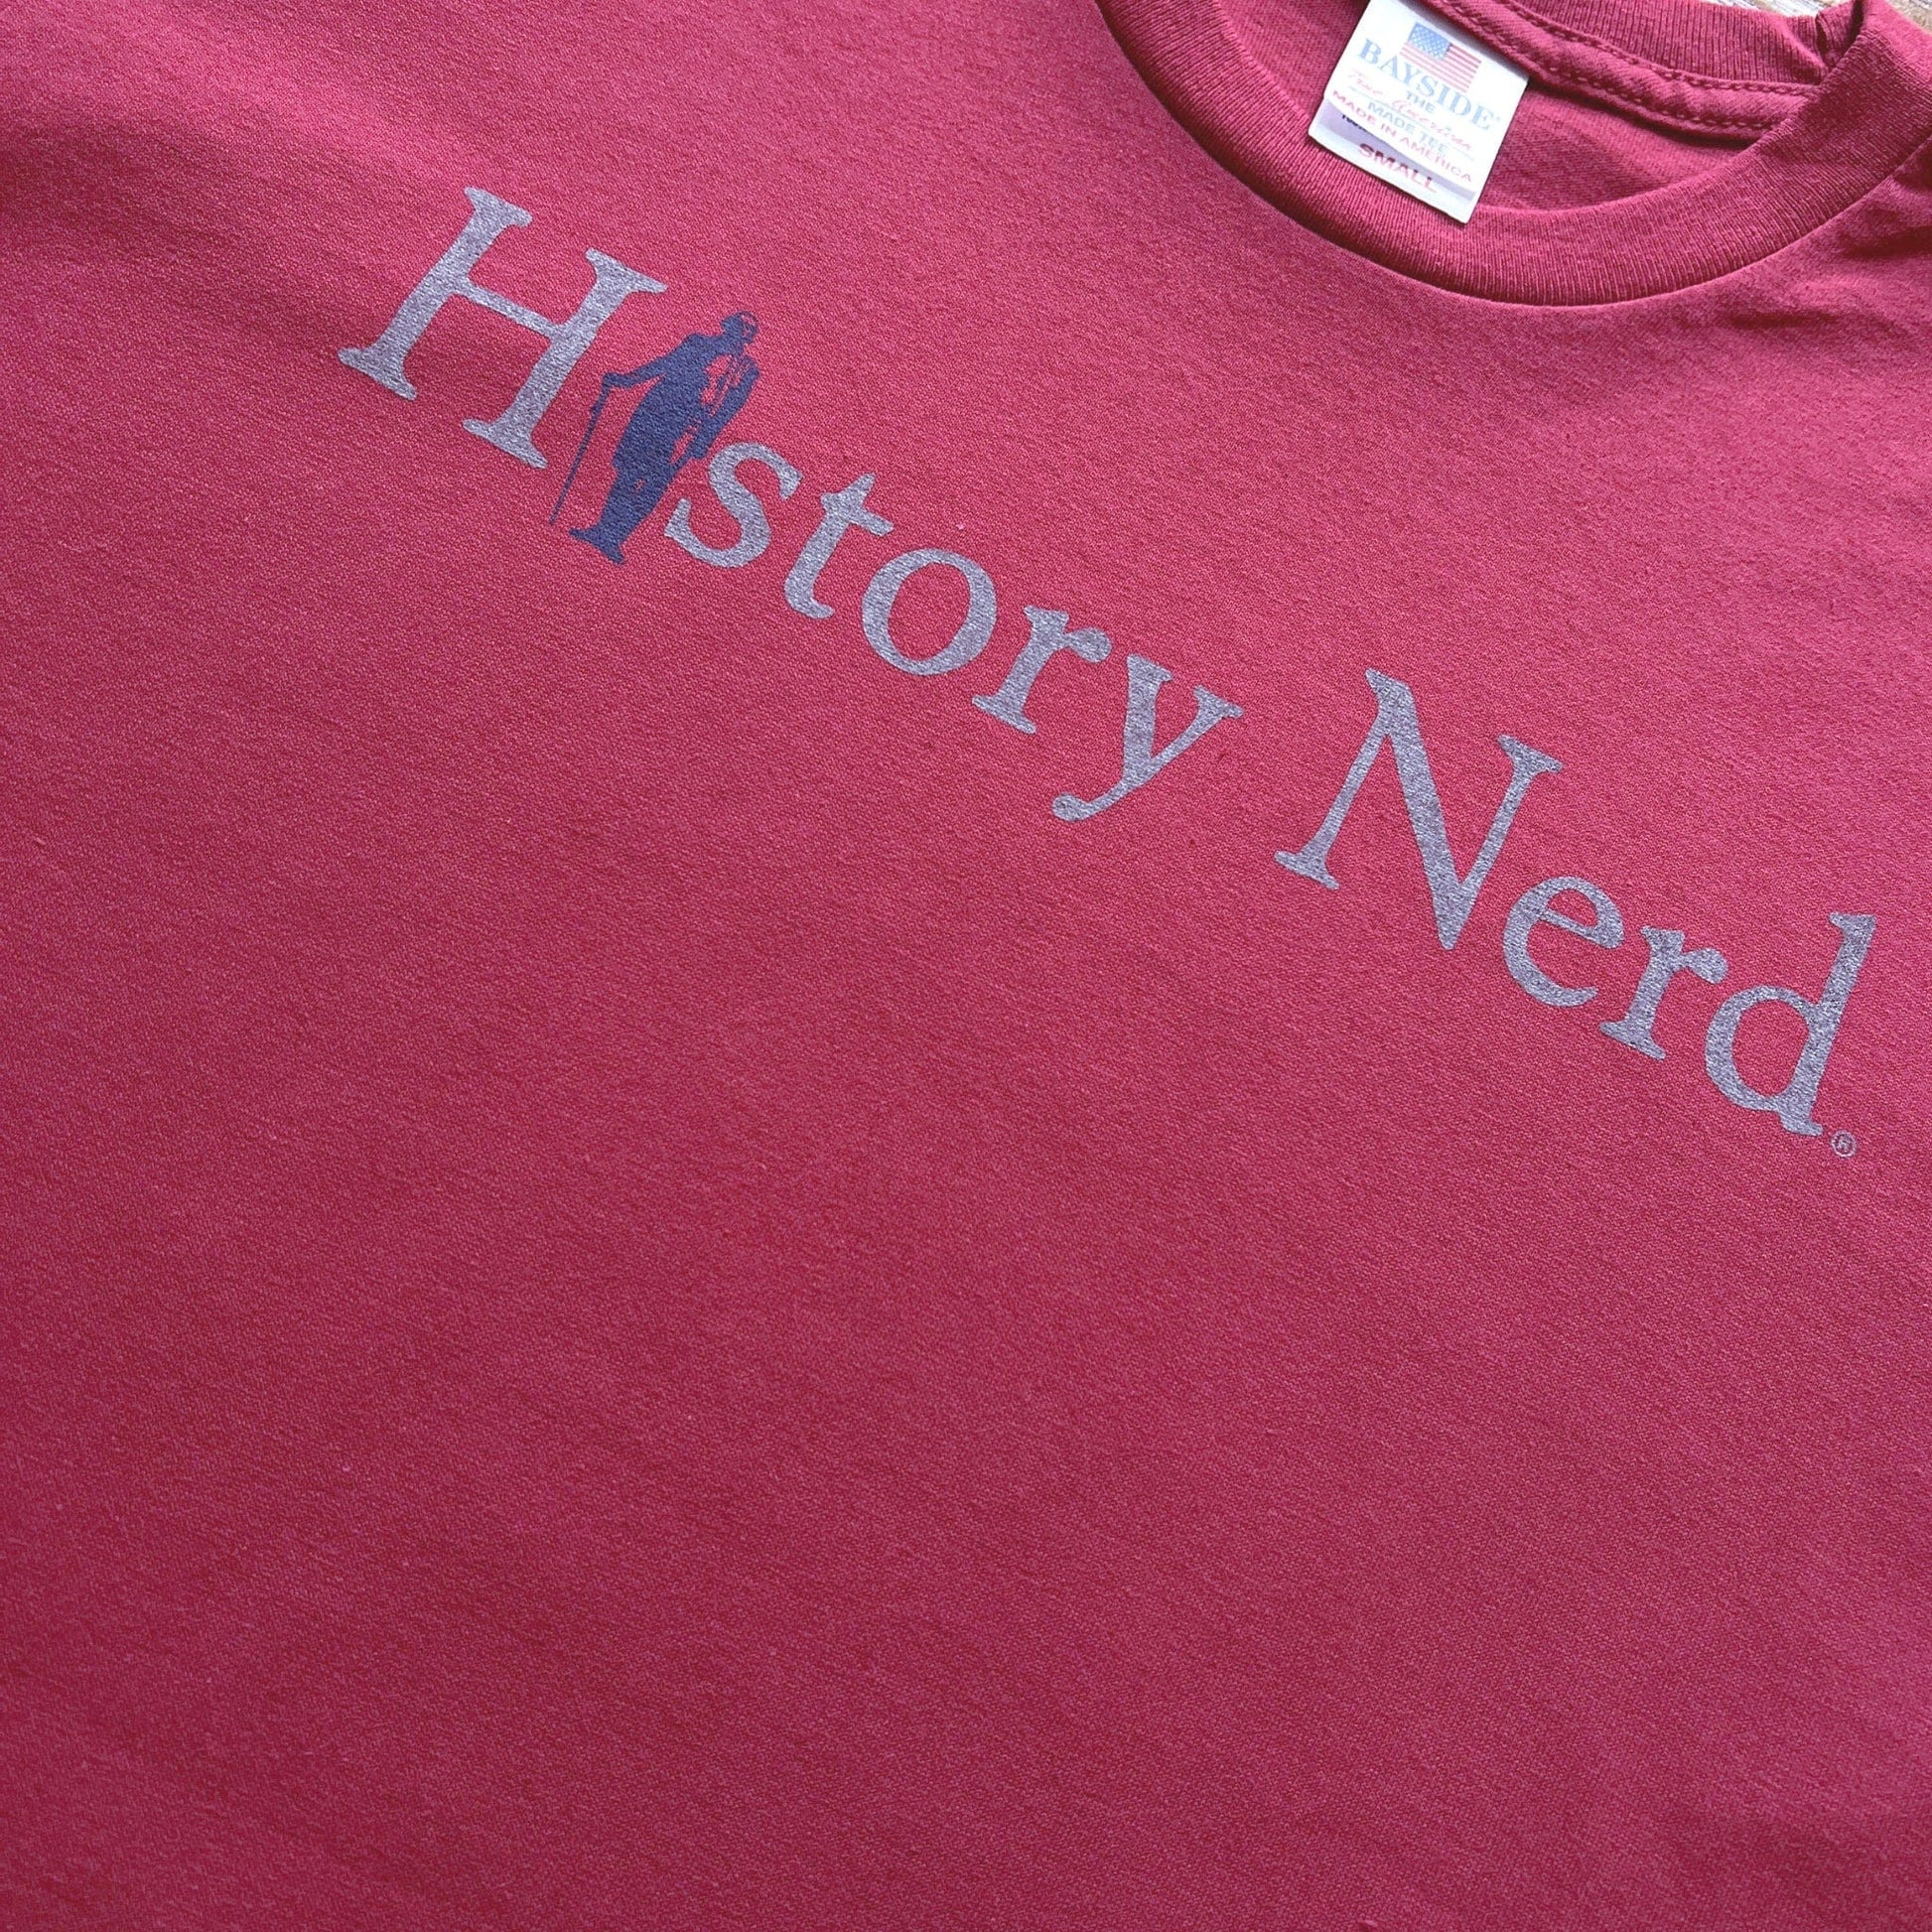 Close-up "History Nerd" shirt with George Washington — from the History List Store